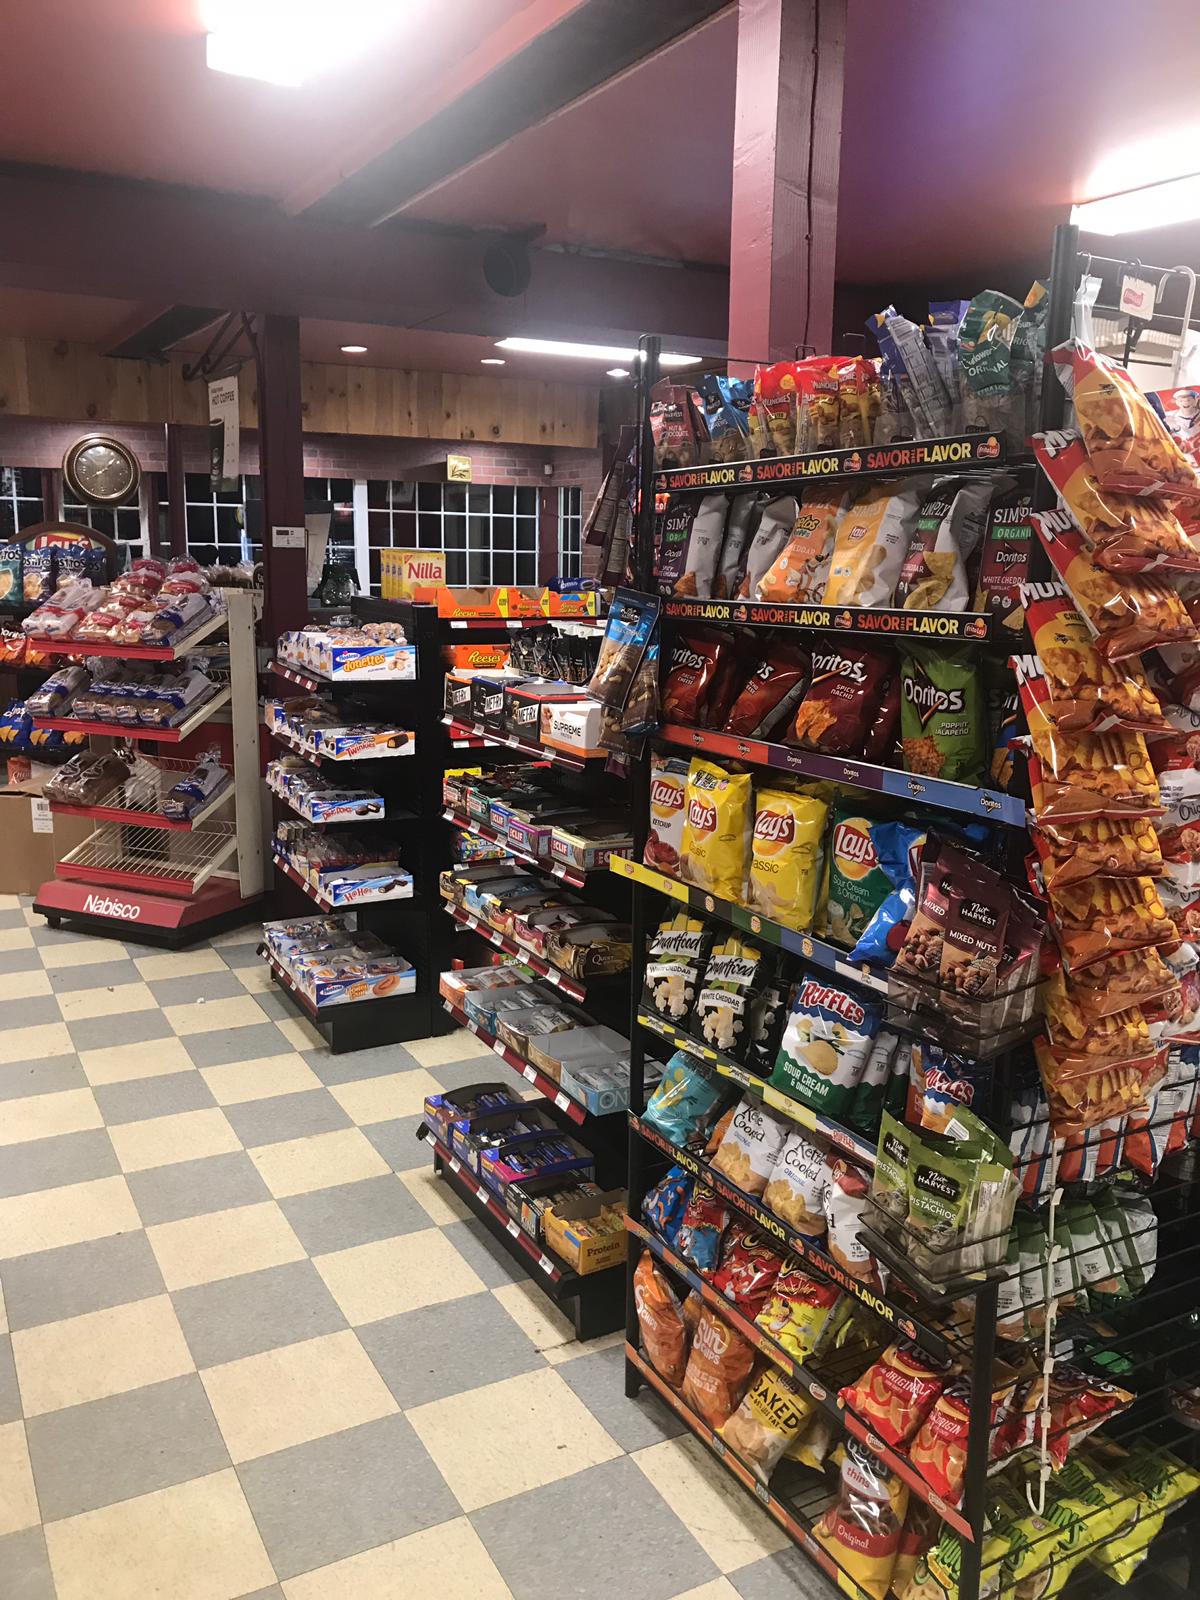 Cherry Brook Pizza & Grocery